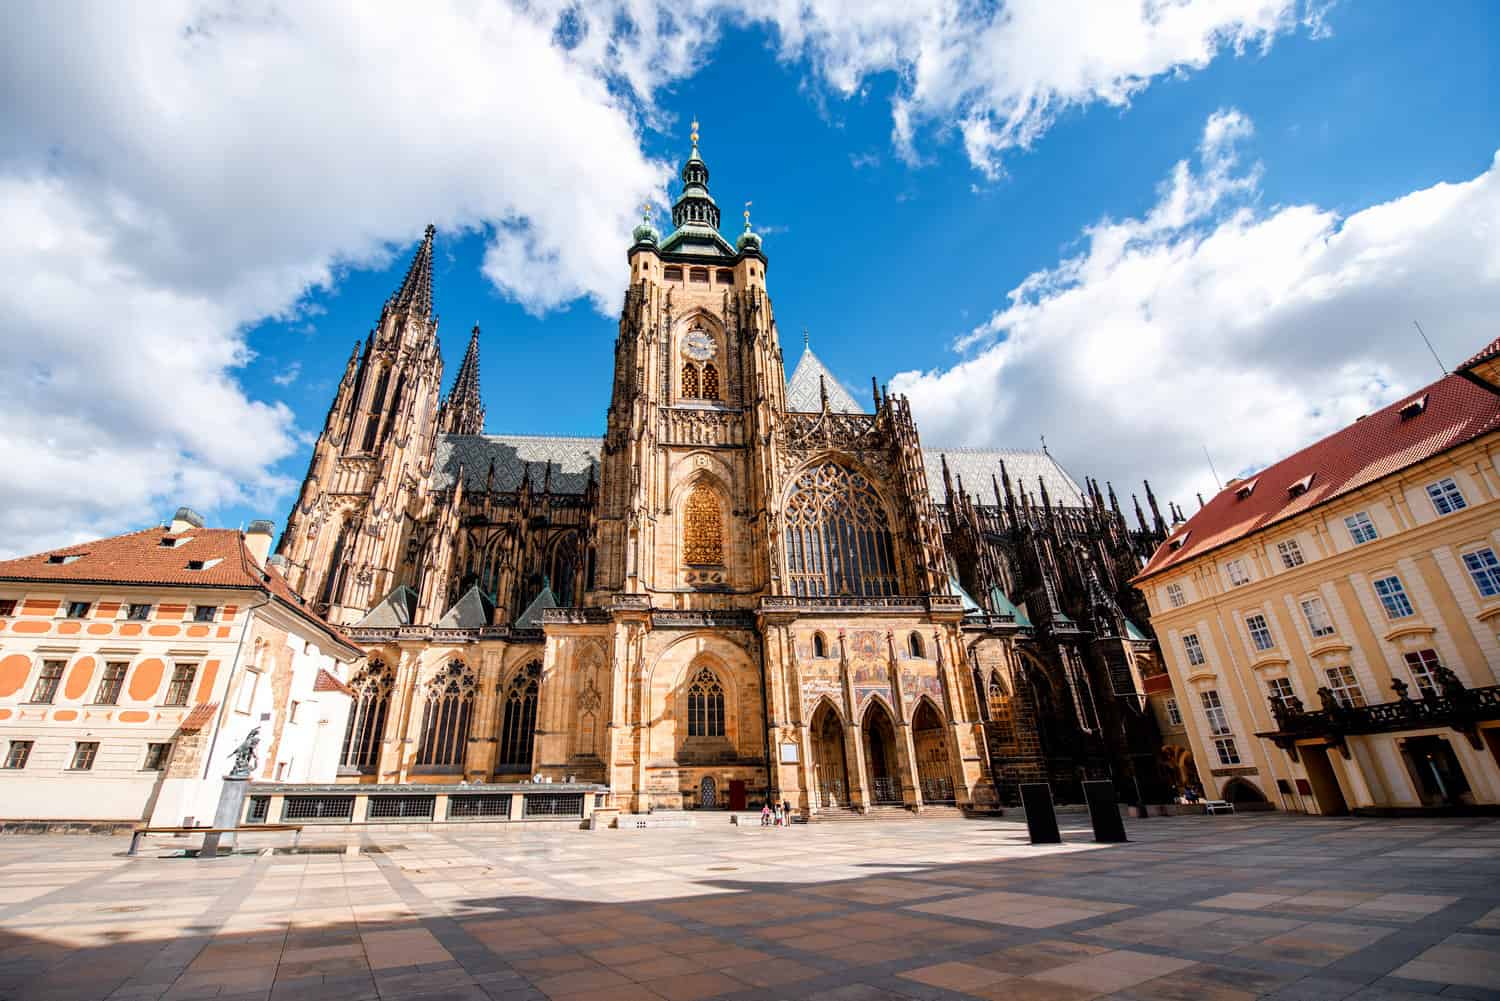 St.Vitus Cathedral